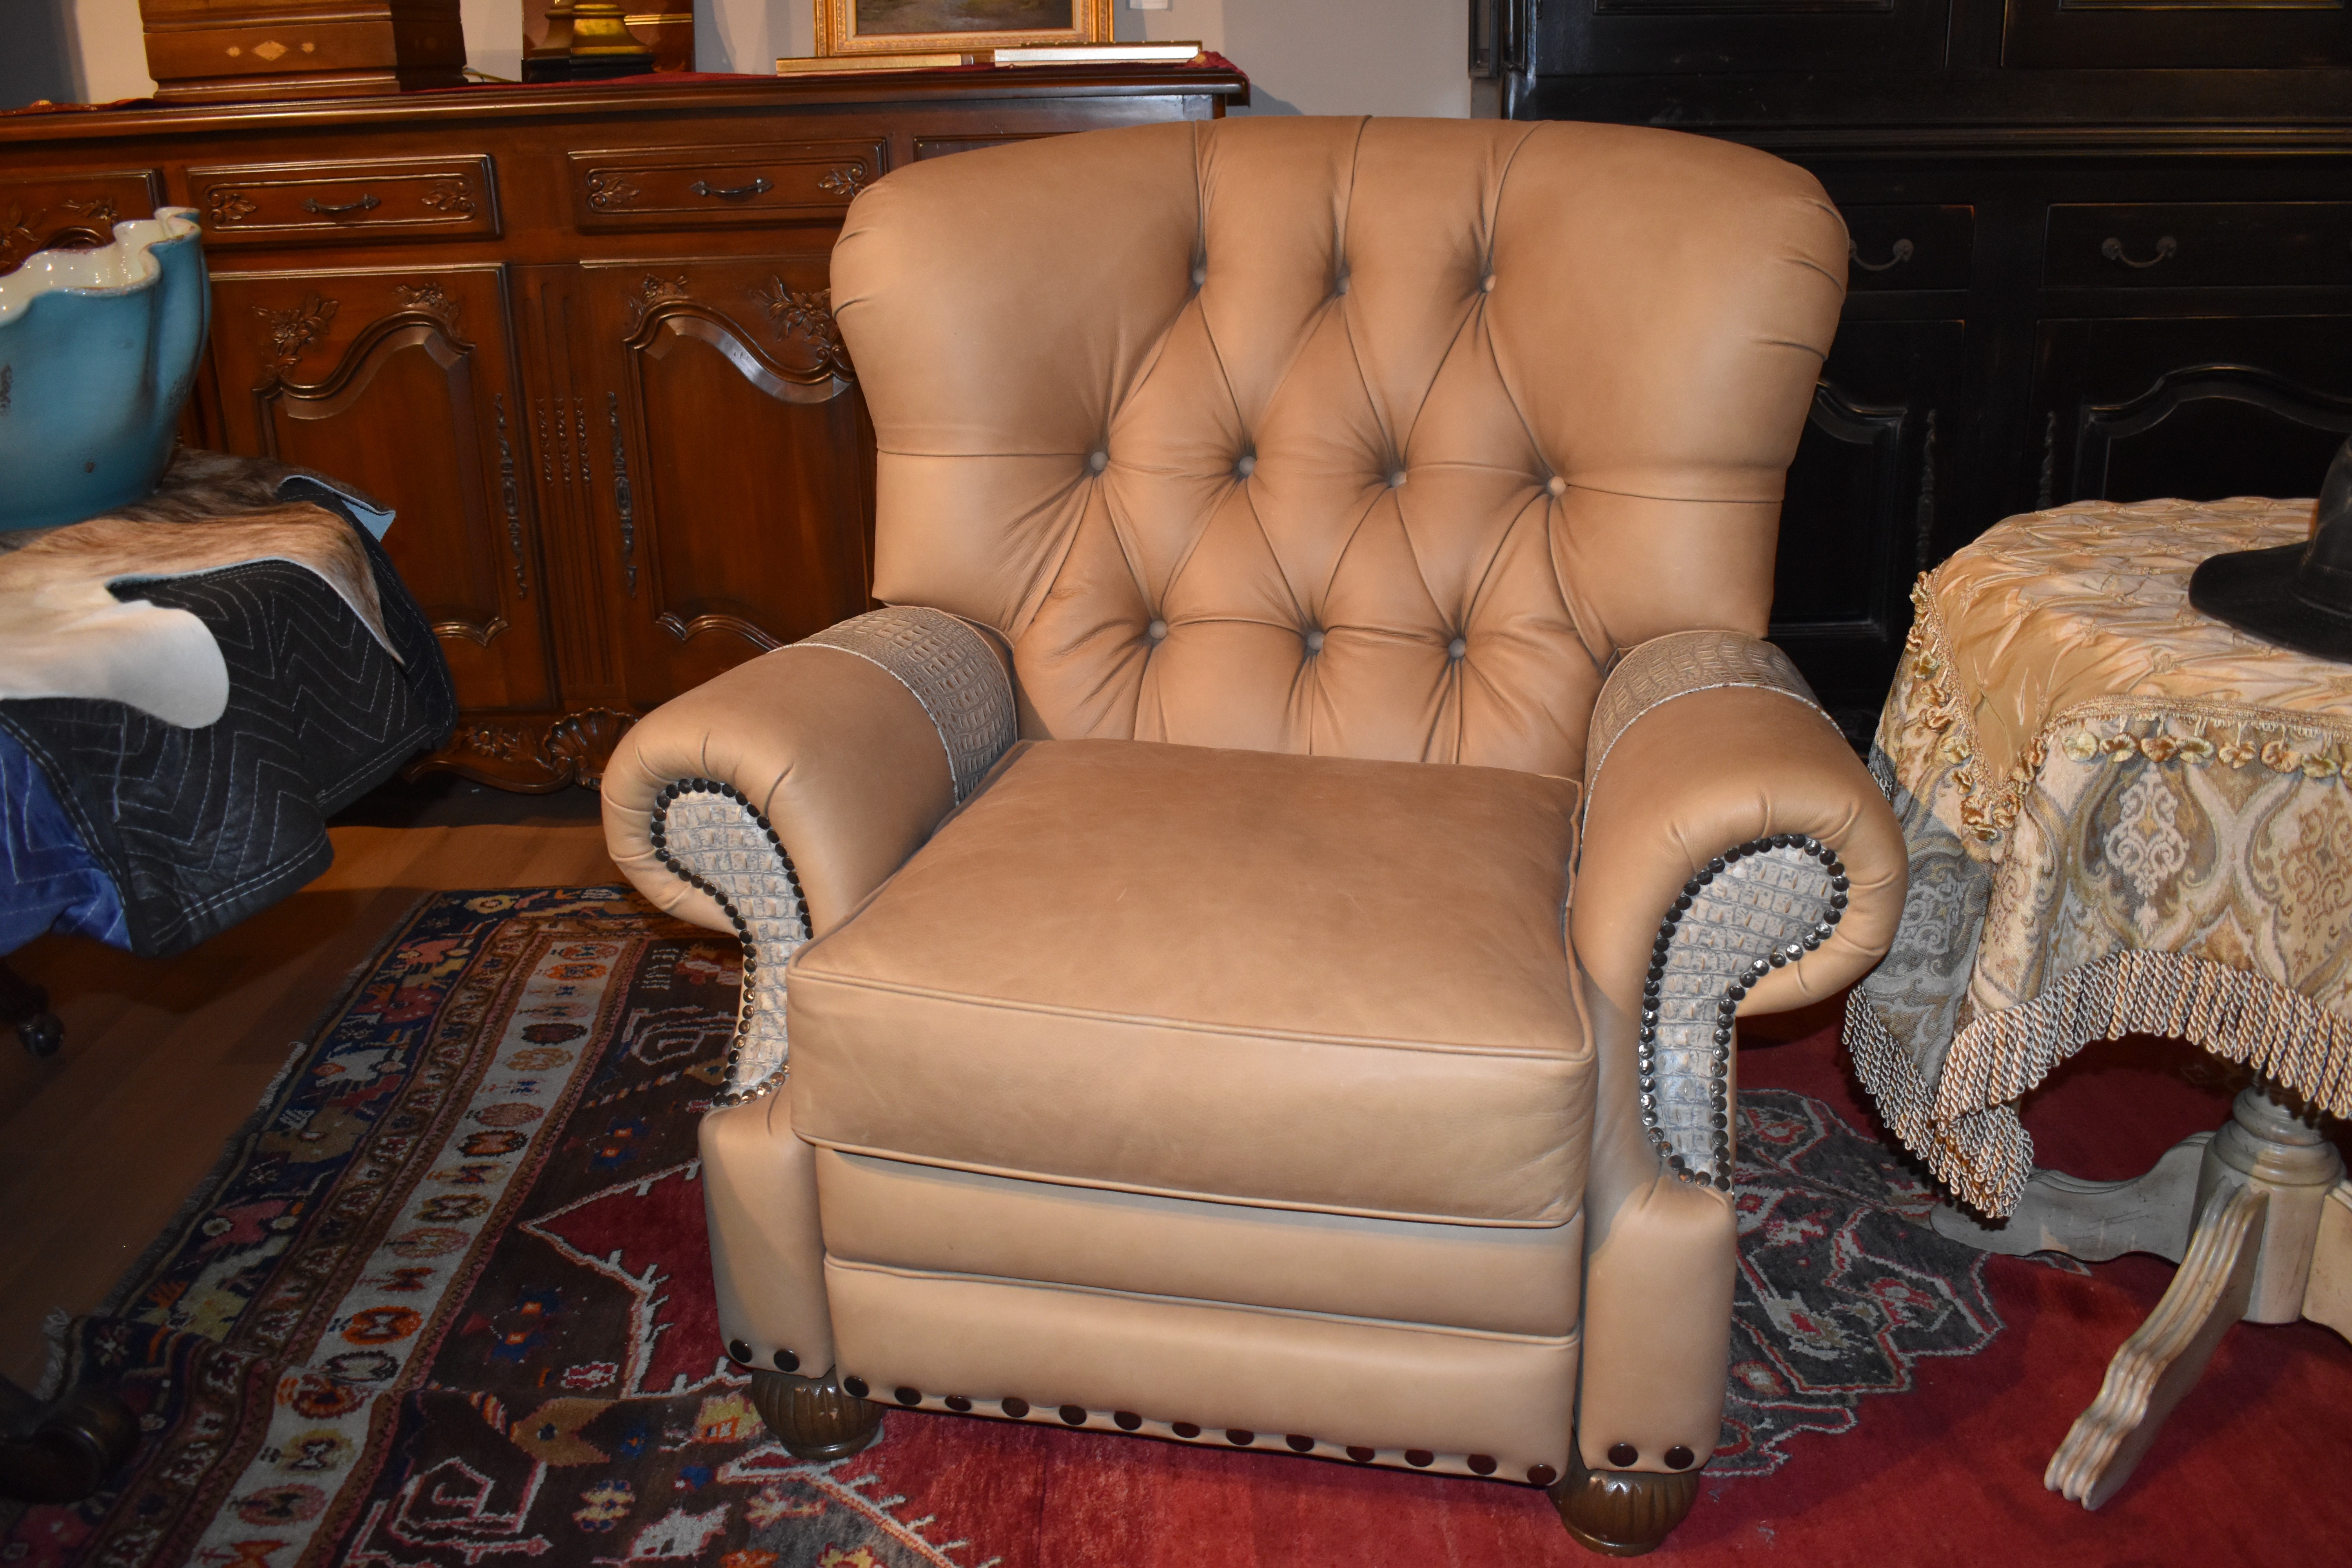 MOTION SEATING - Recliners, Swivels, Rockers Leather and Gator Hide Churchill Tufted Recliner Chair 6622